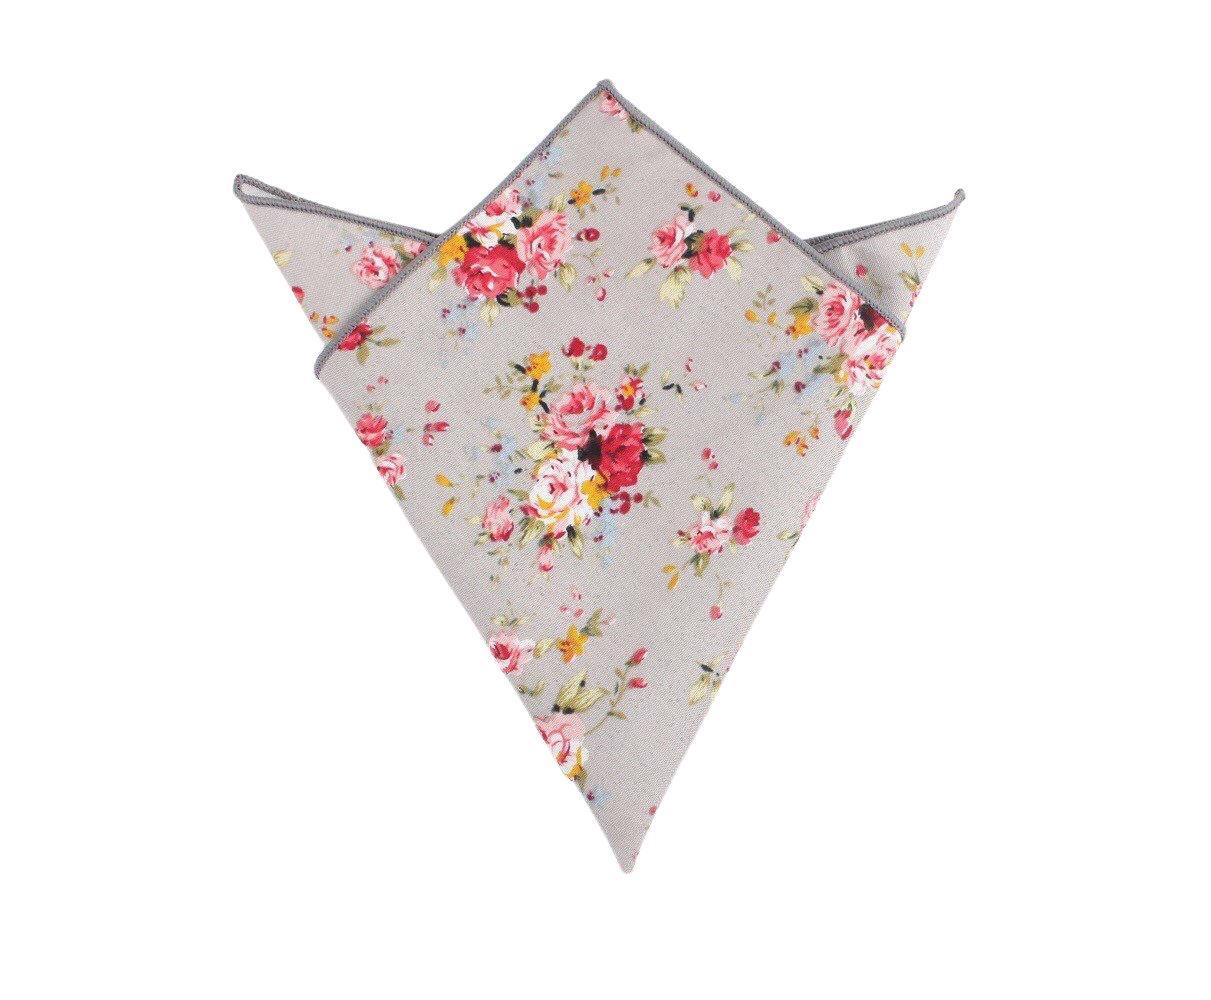 Gray Floral Pocket Square RAIN Mytieshop Material CottonItem Length: 23 cm ( 9 inches)Item Width : 22 cm (8.6 inches) A dashing addition to your formalwear. A modern and stylish take on the traditional pocket square, this RAIN design is perfect for injecting a touch of elegance to any outfit. With a sleek gray background and floral pattern, it'll make any suit stand out. With its versatile style, this pocket square is perfect for any formal event. Whether you're attending a wedding or simply dre